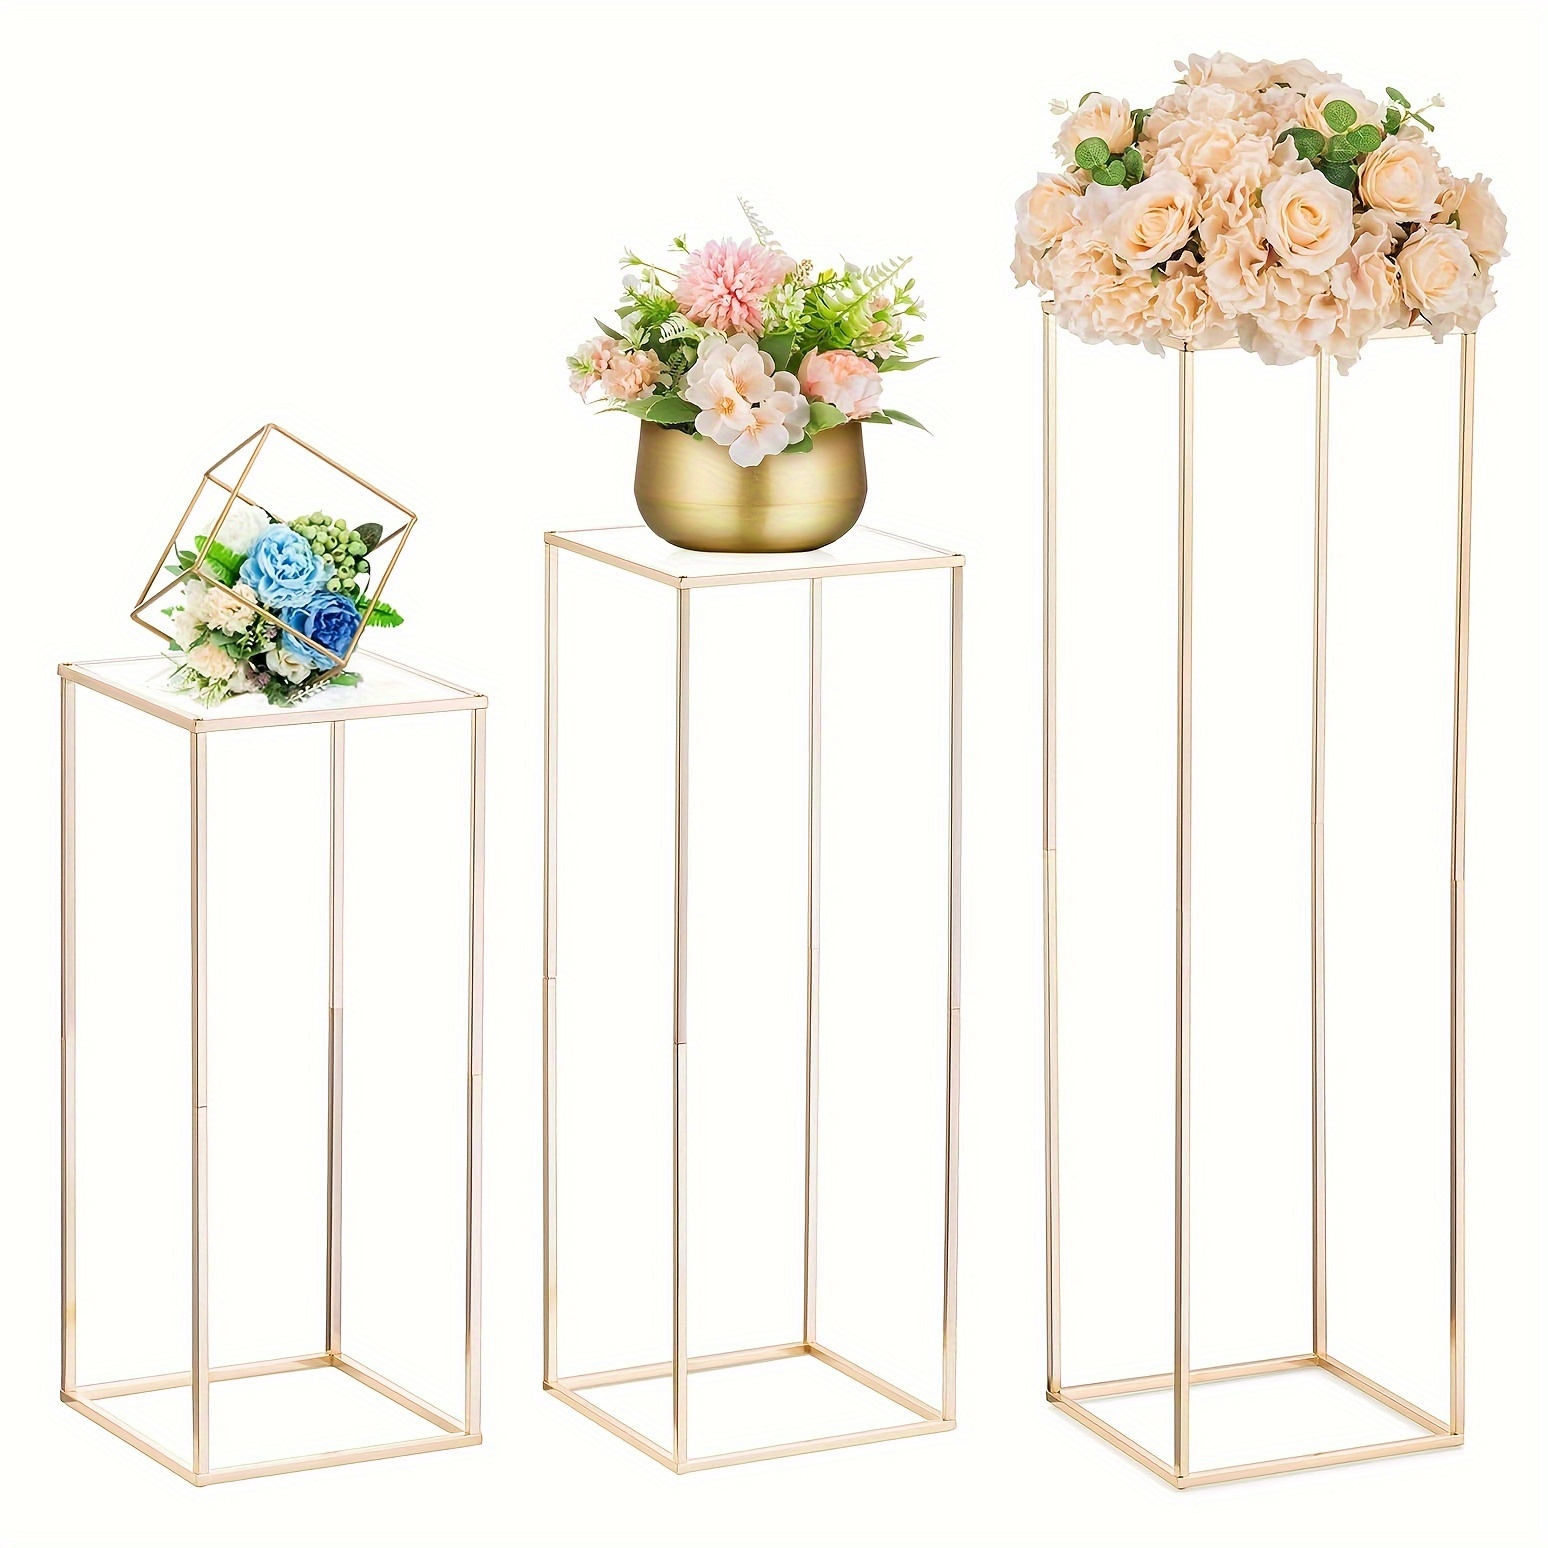 

3pcs, Wedding Centerpieces For Tables With Acrylic Panel, Tall Golden Vases For Centerpieces, Flower Stand For Centerpiece Table Metal Vase Column Stand Party Decorations